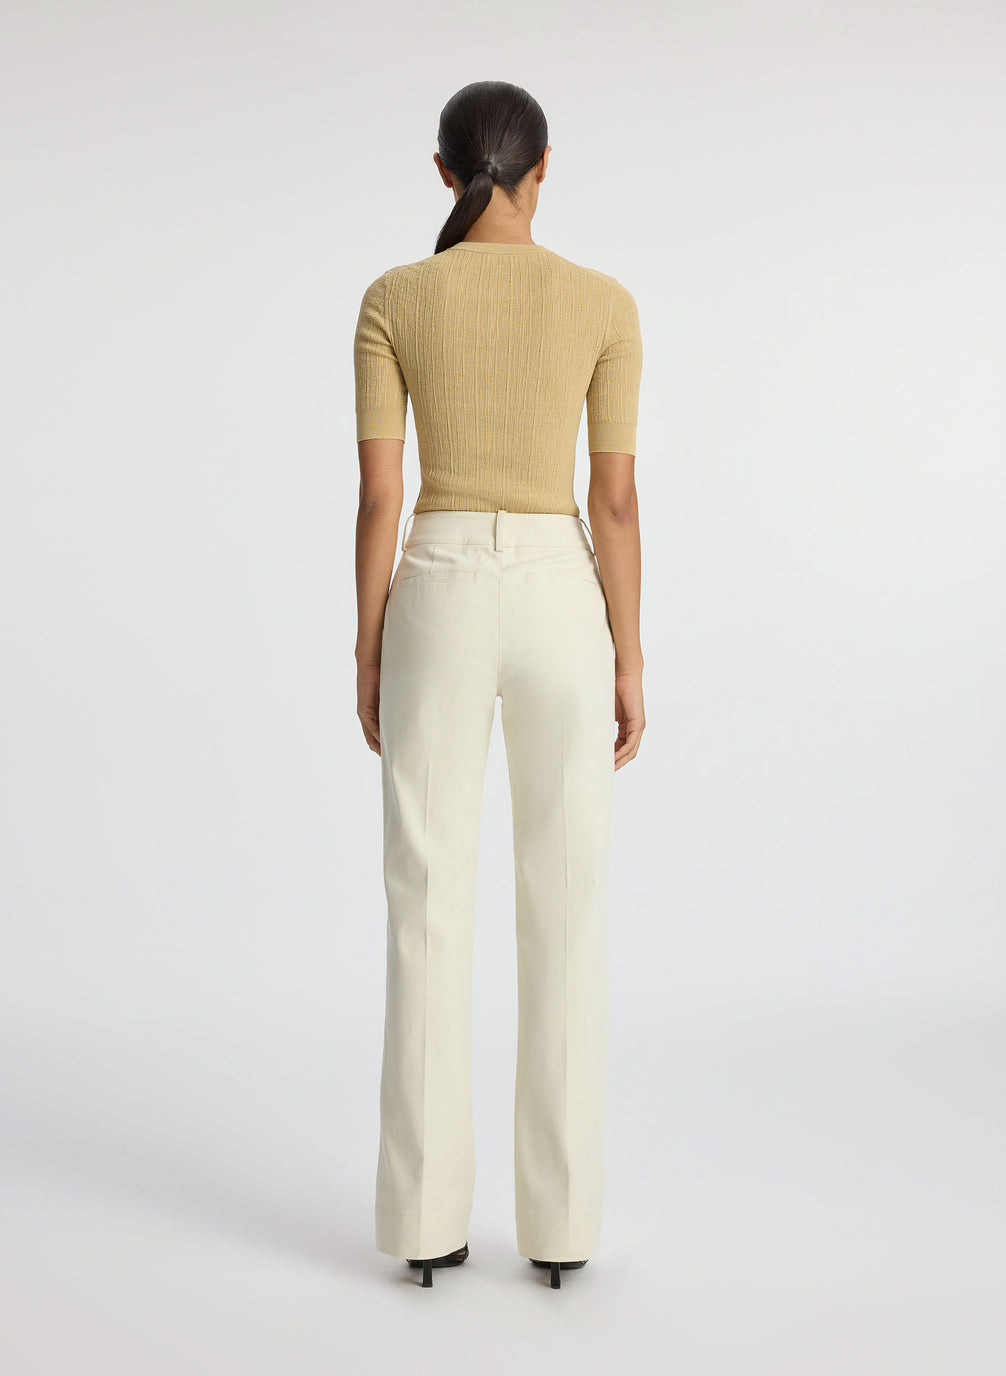 back  view of woman wearing beige half sleeve button placket shirt and cream pants